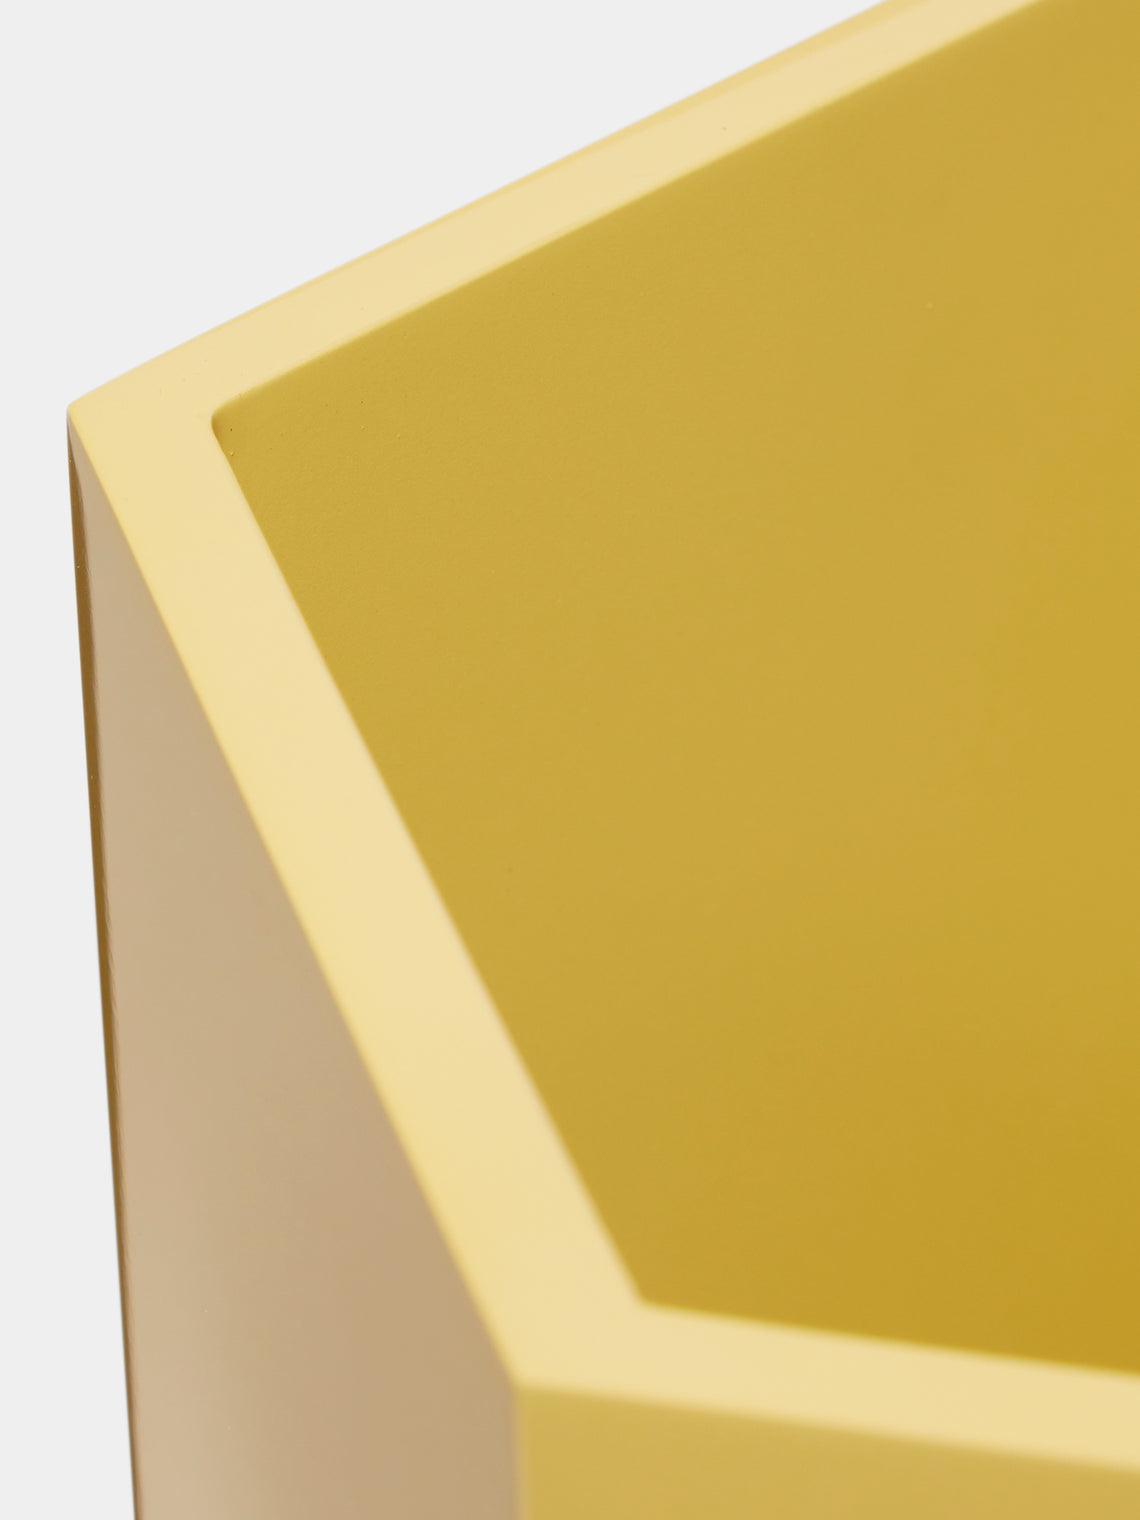 The Lacquer Company - Lacquered Hexagonal Bin - Yellow - ABASK